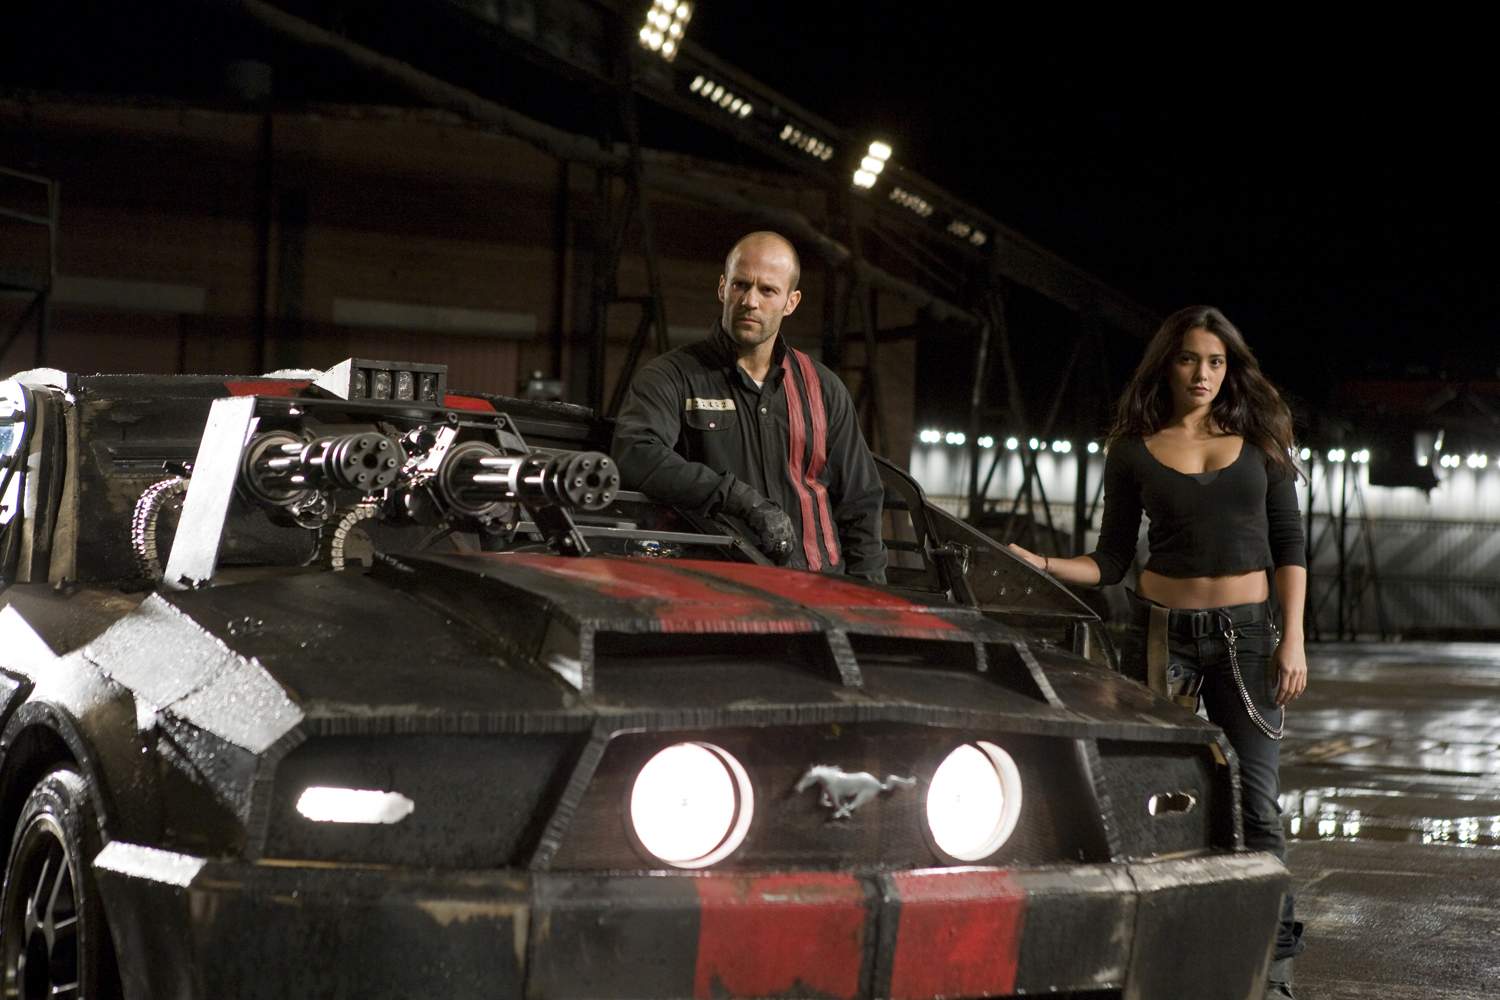 JASON STATHAM and NATALIE MARTINEZ in an action-thriller set in the post-industrial wasteland of tomorrow, with the world's most brutal sporting event as its backdrop - Death Race. Photo Credit: Takashi Seida.